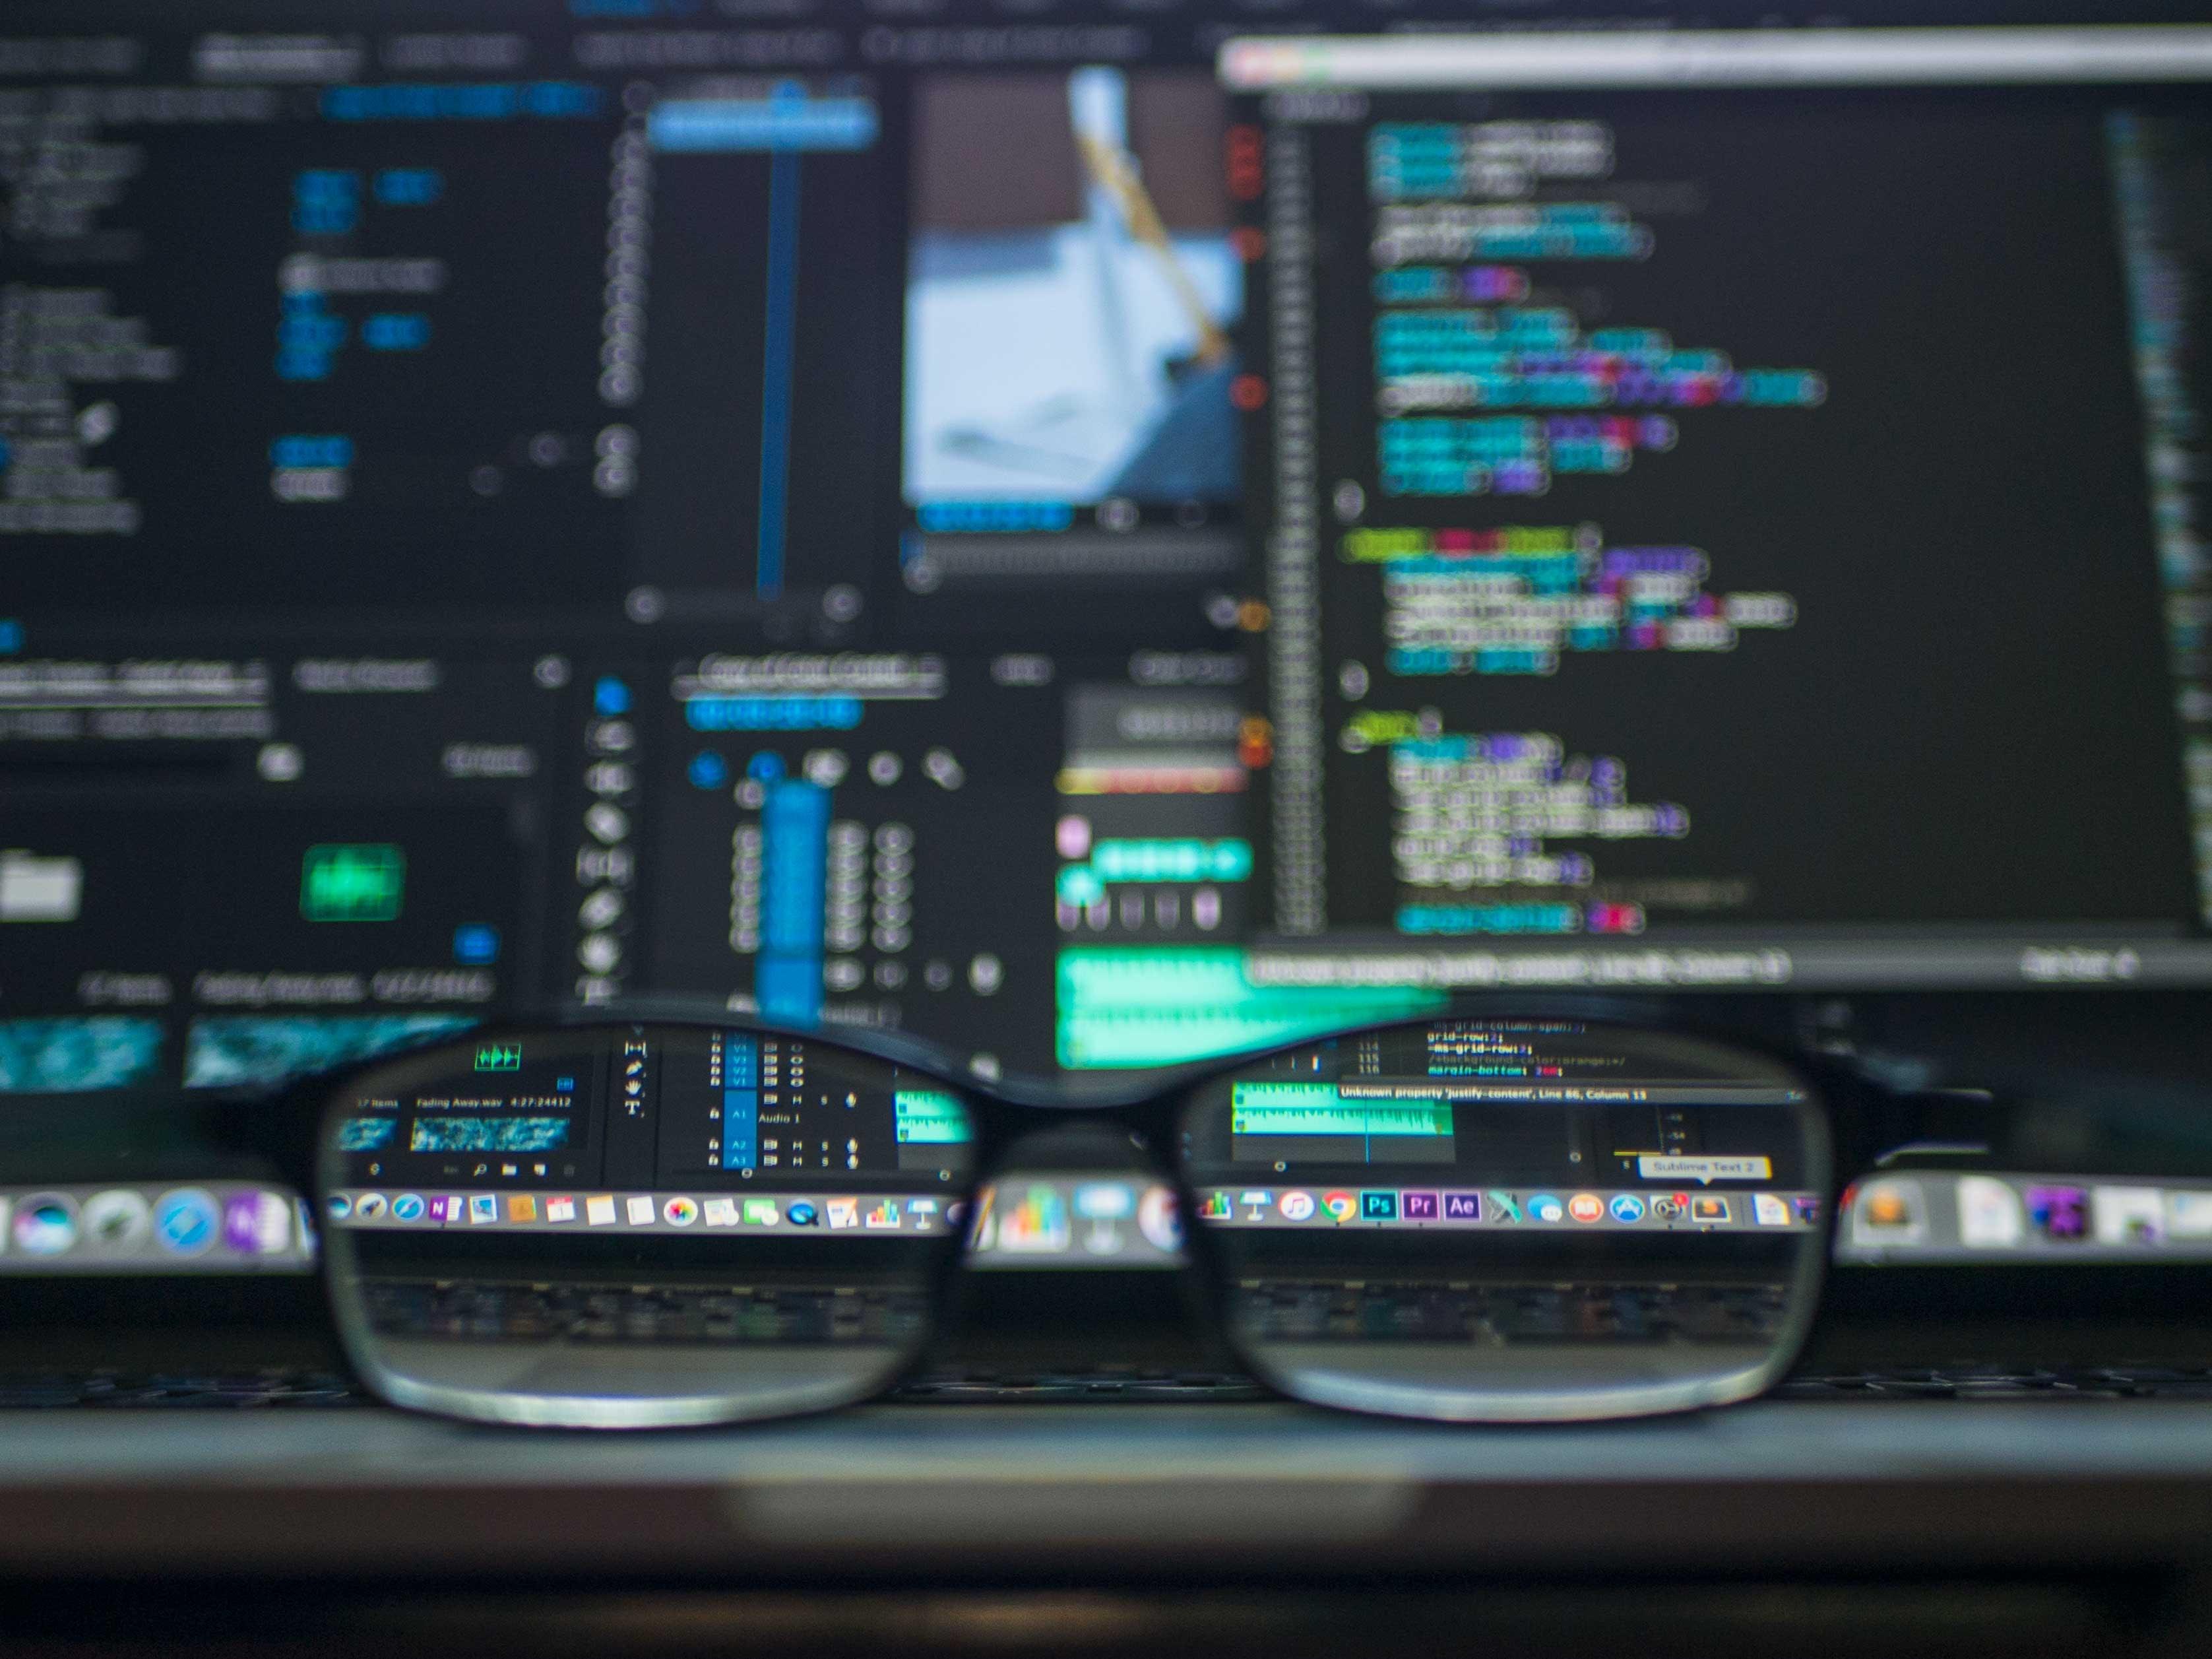 A photo of code on computer screens, blurred except a small part seen through glasses